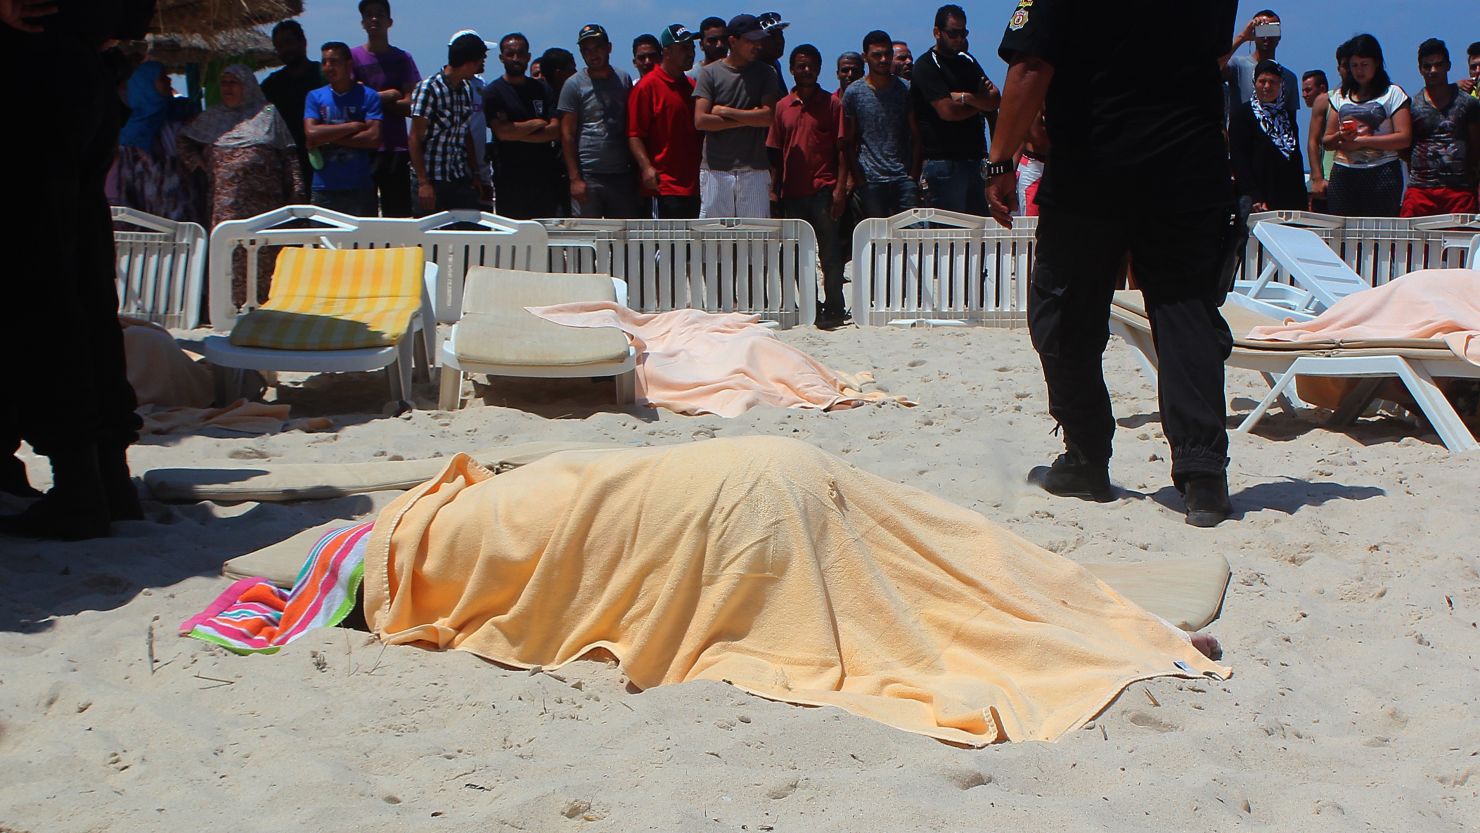 The June 26 beachfront attack at Sousse has left at least 27 people dead, including foreigners.